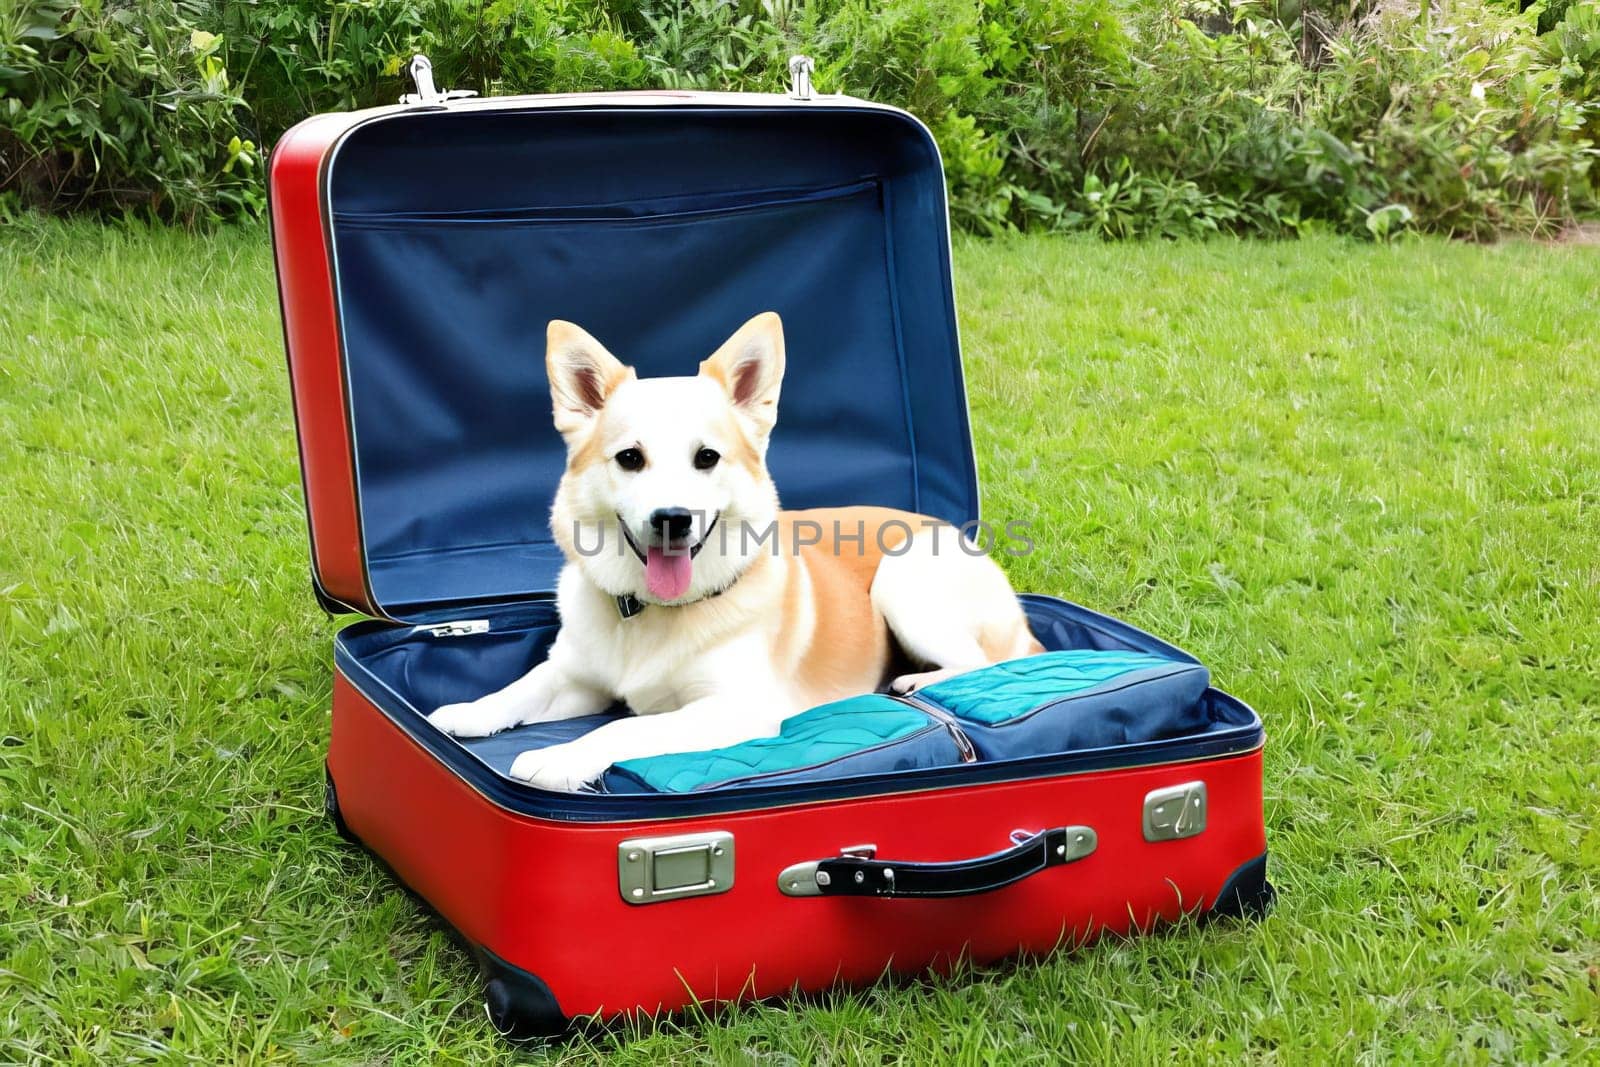 A curious dog perched on an open suitcase, ready for adventure during a vacation getaway